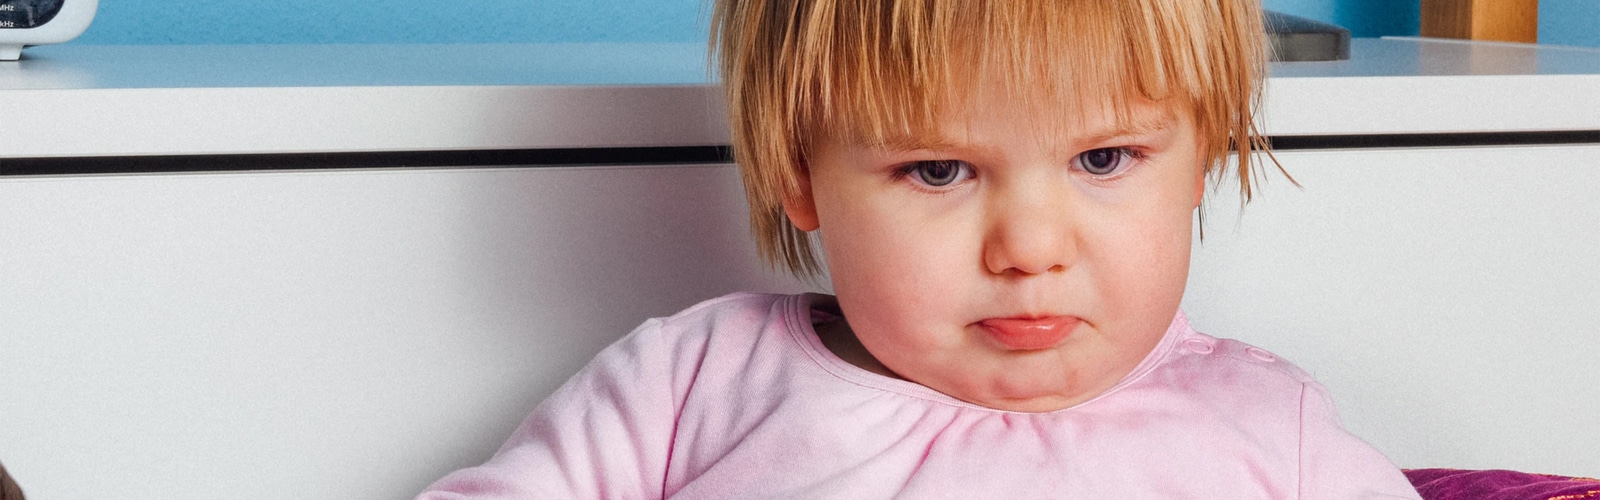 How do I handle my child's tantrums?